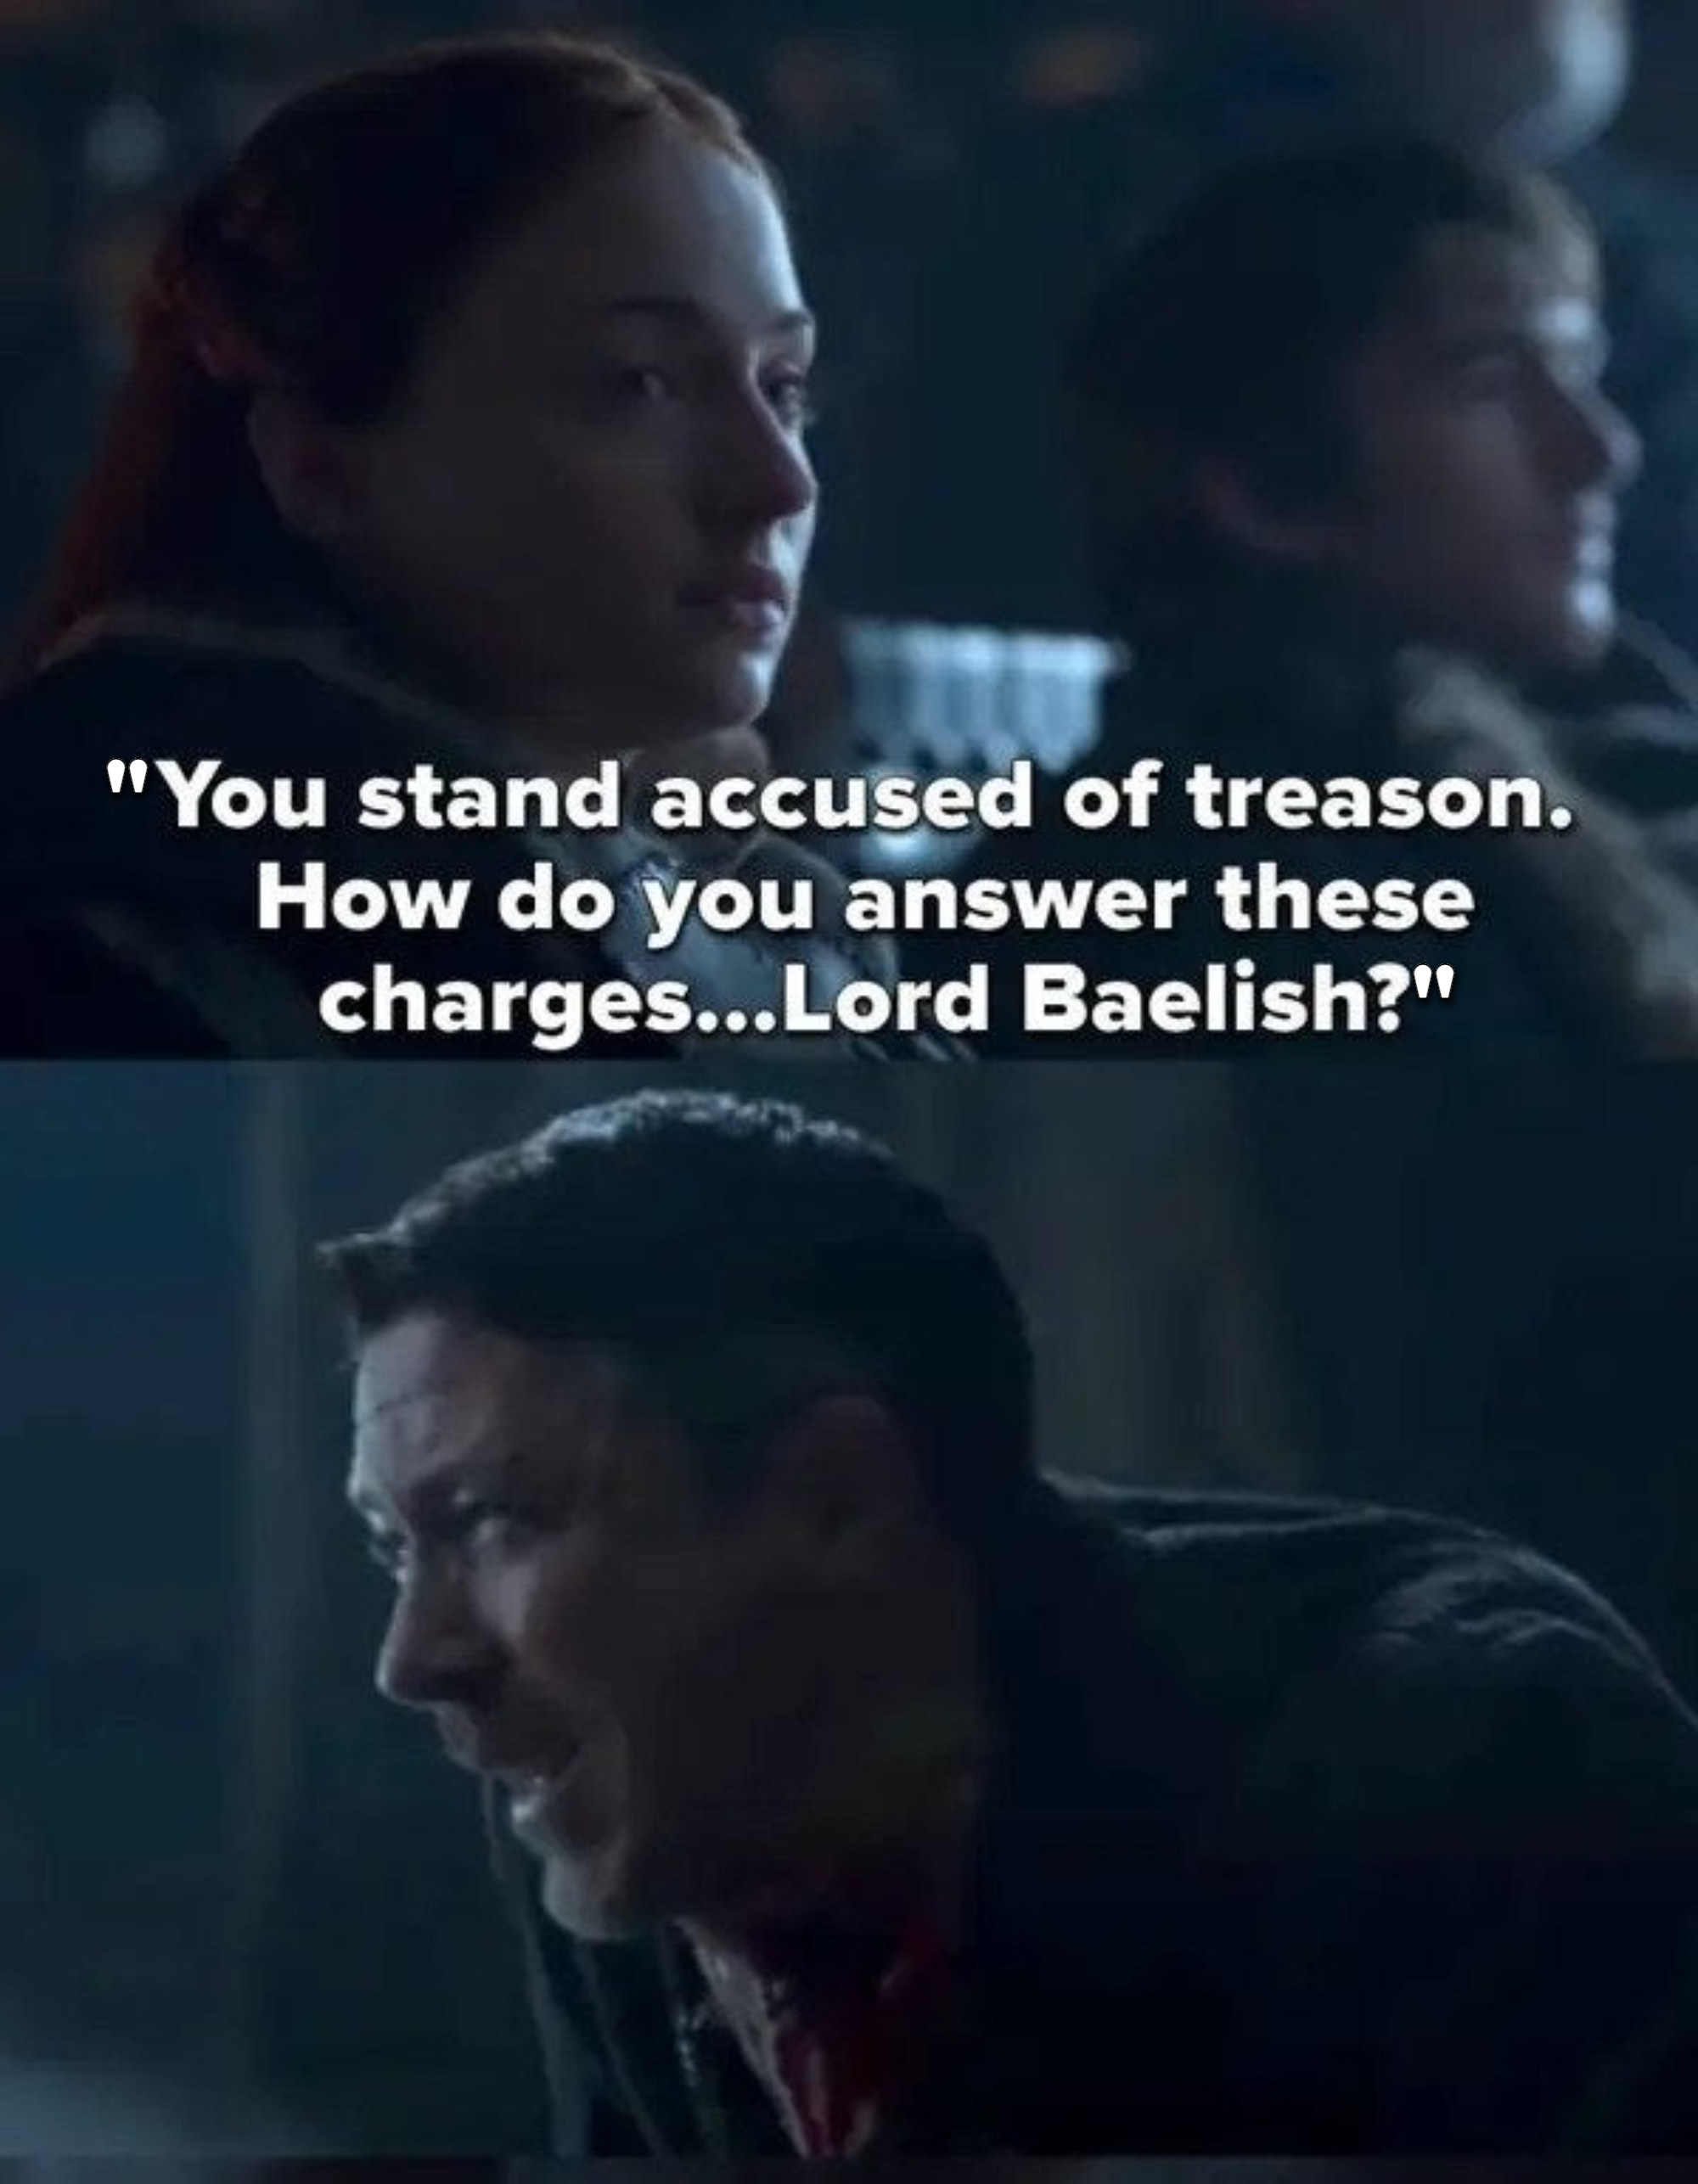 Sansa asks how the accused answers the charges of treason, then turns to Littlefinger, who Arya kills